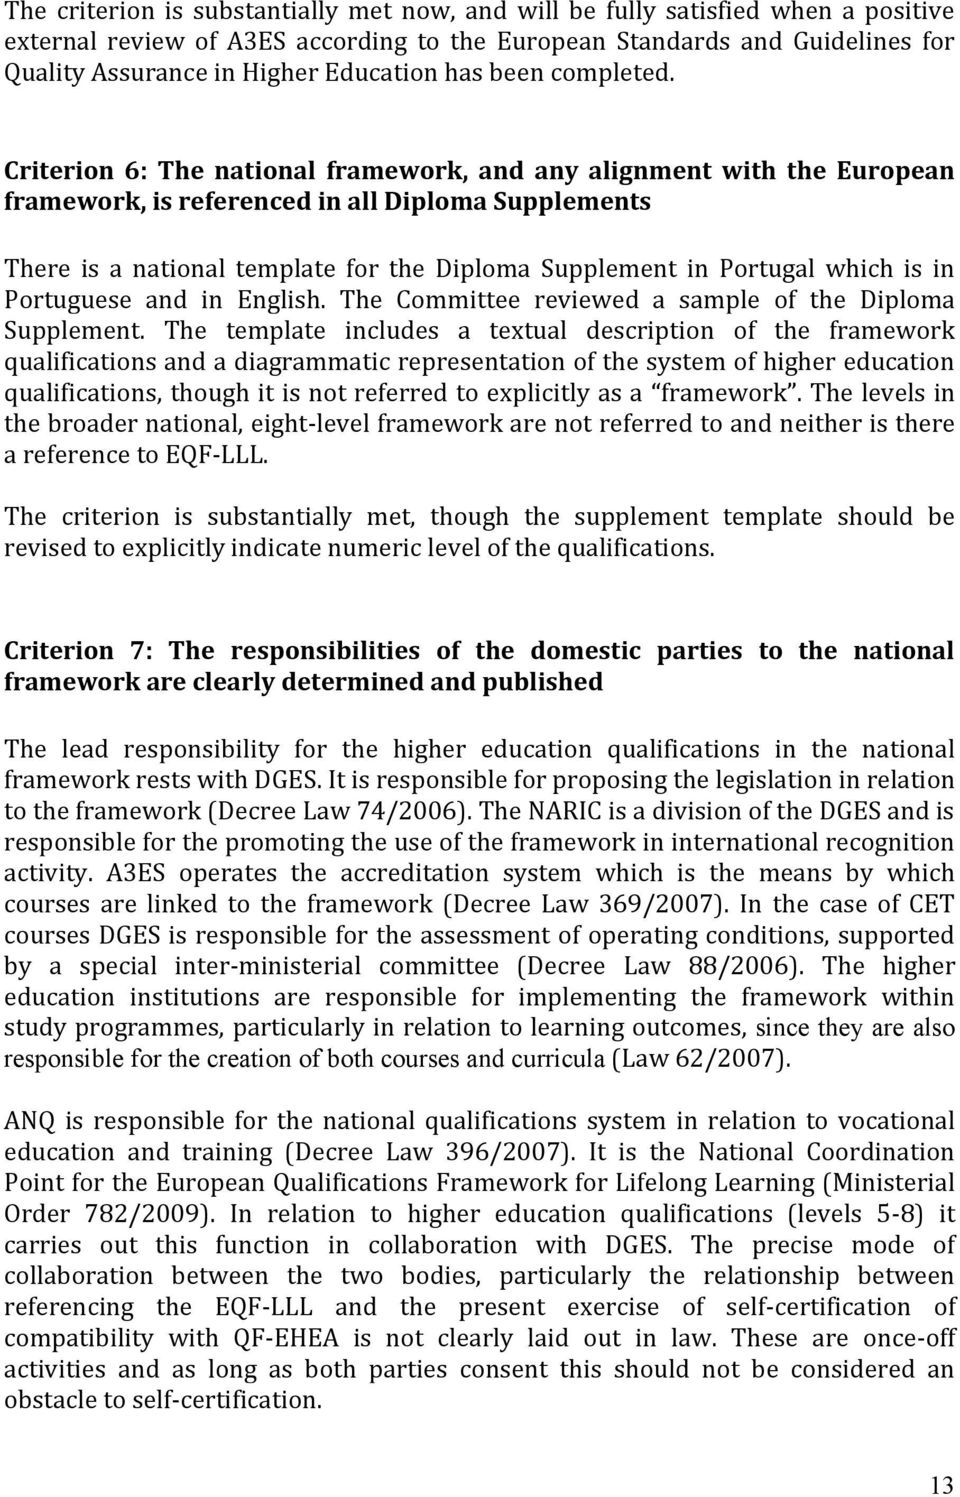 Criterion 6: The national framework, and any alignment with the European framework, is referenced in all Diploma Supplements There is a national template for the Diploma Supplement in Portugal which